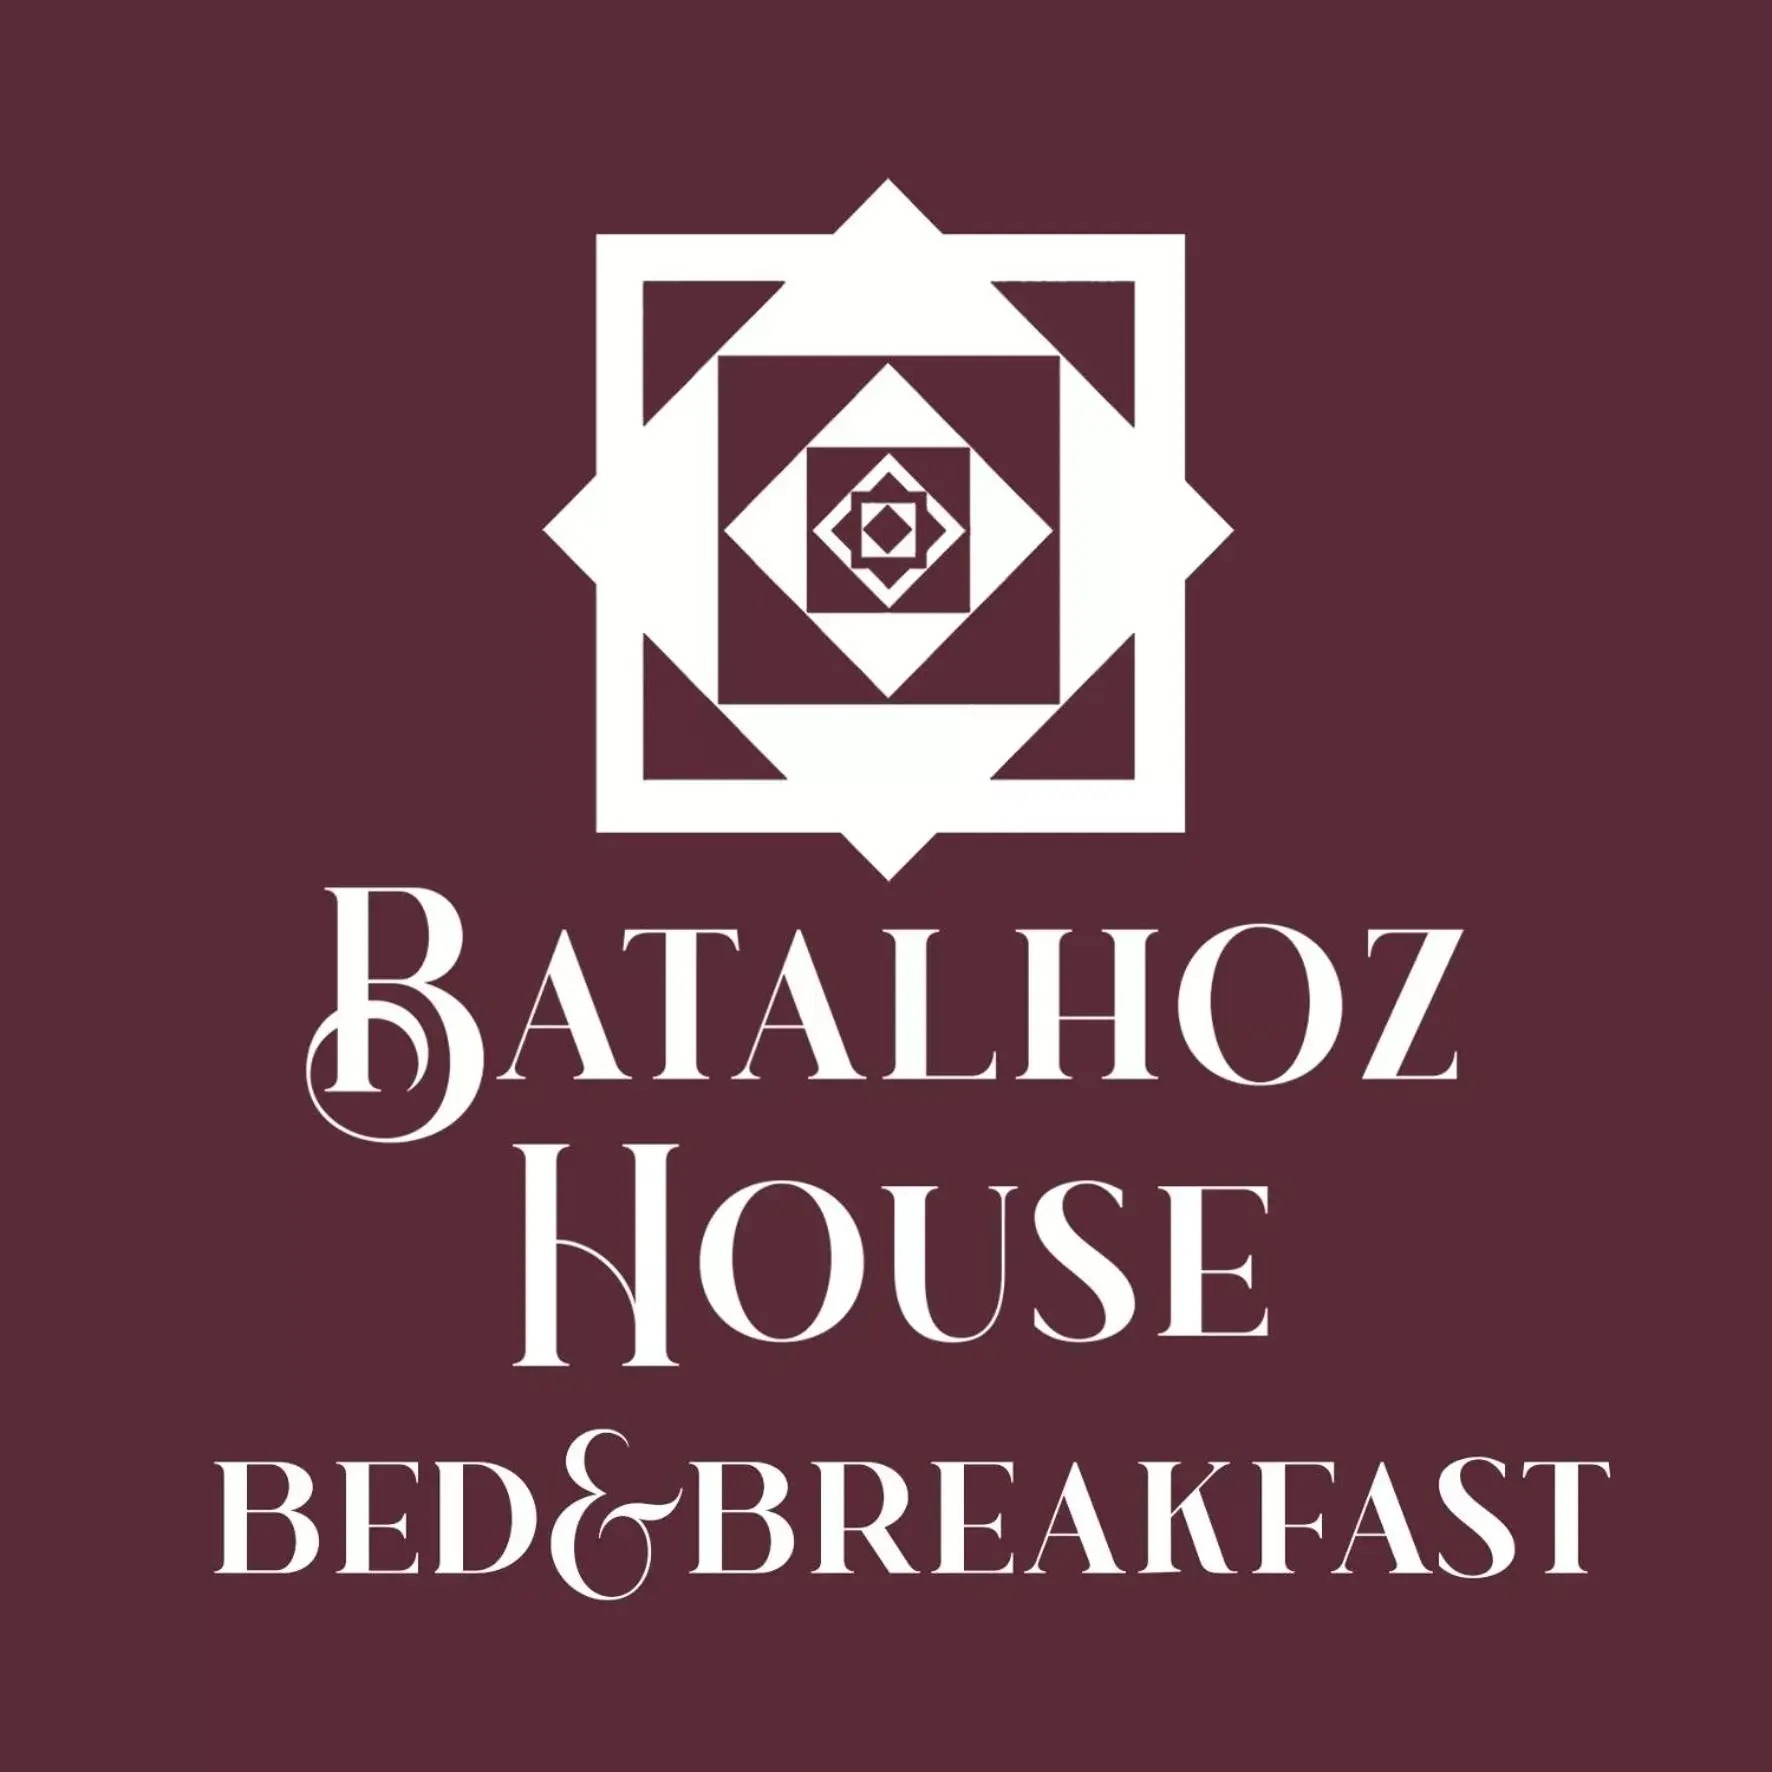 Property logo or sign in Batalhoz House Bed & Breakfast